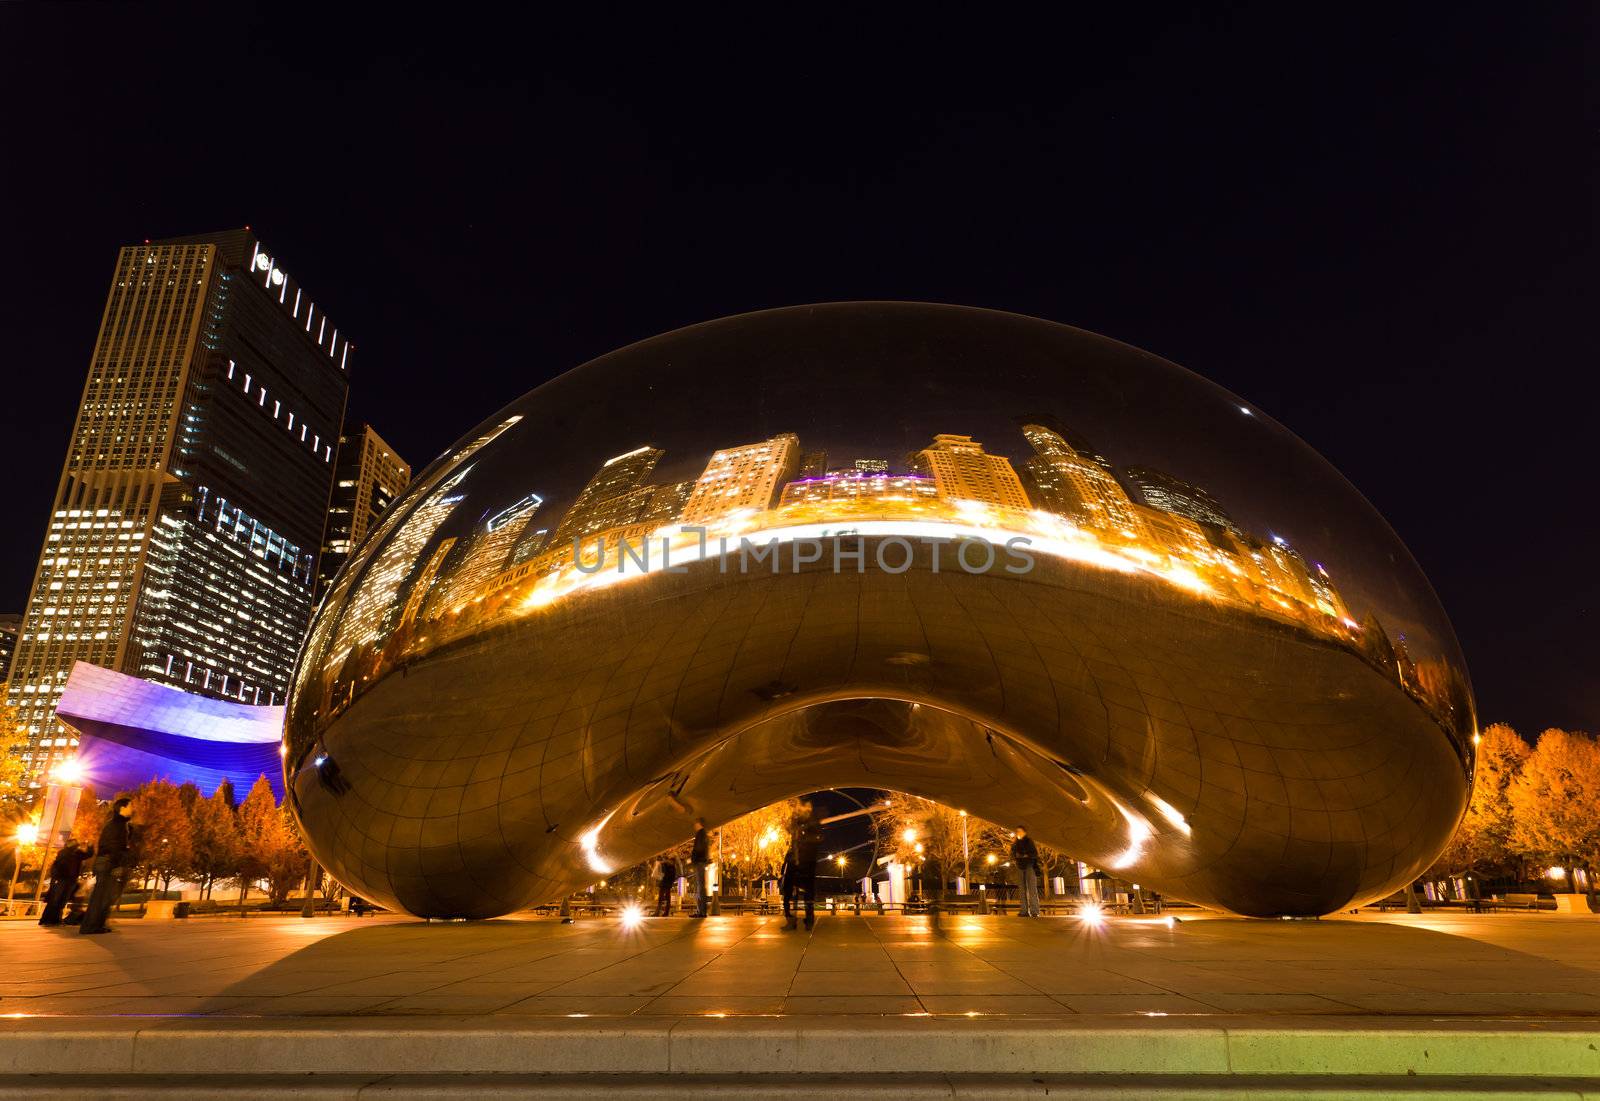 The Millennium Park in downtown Chicago at night